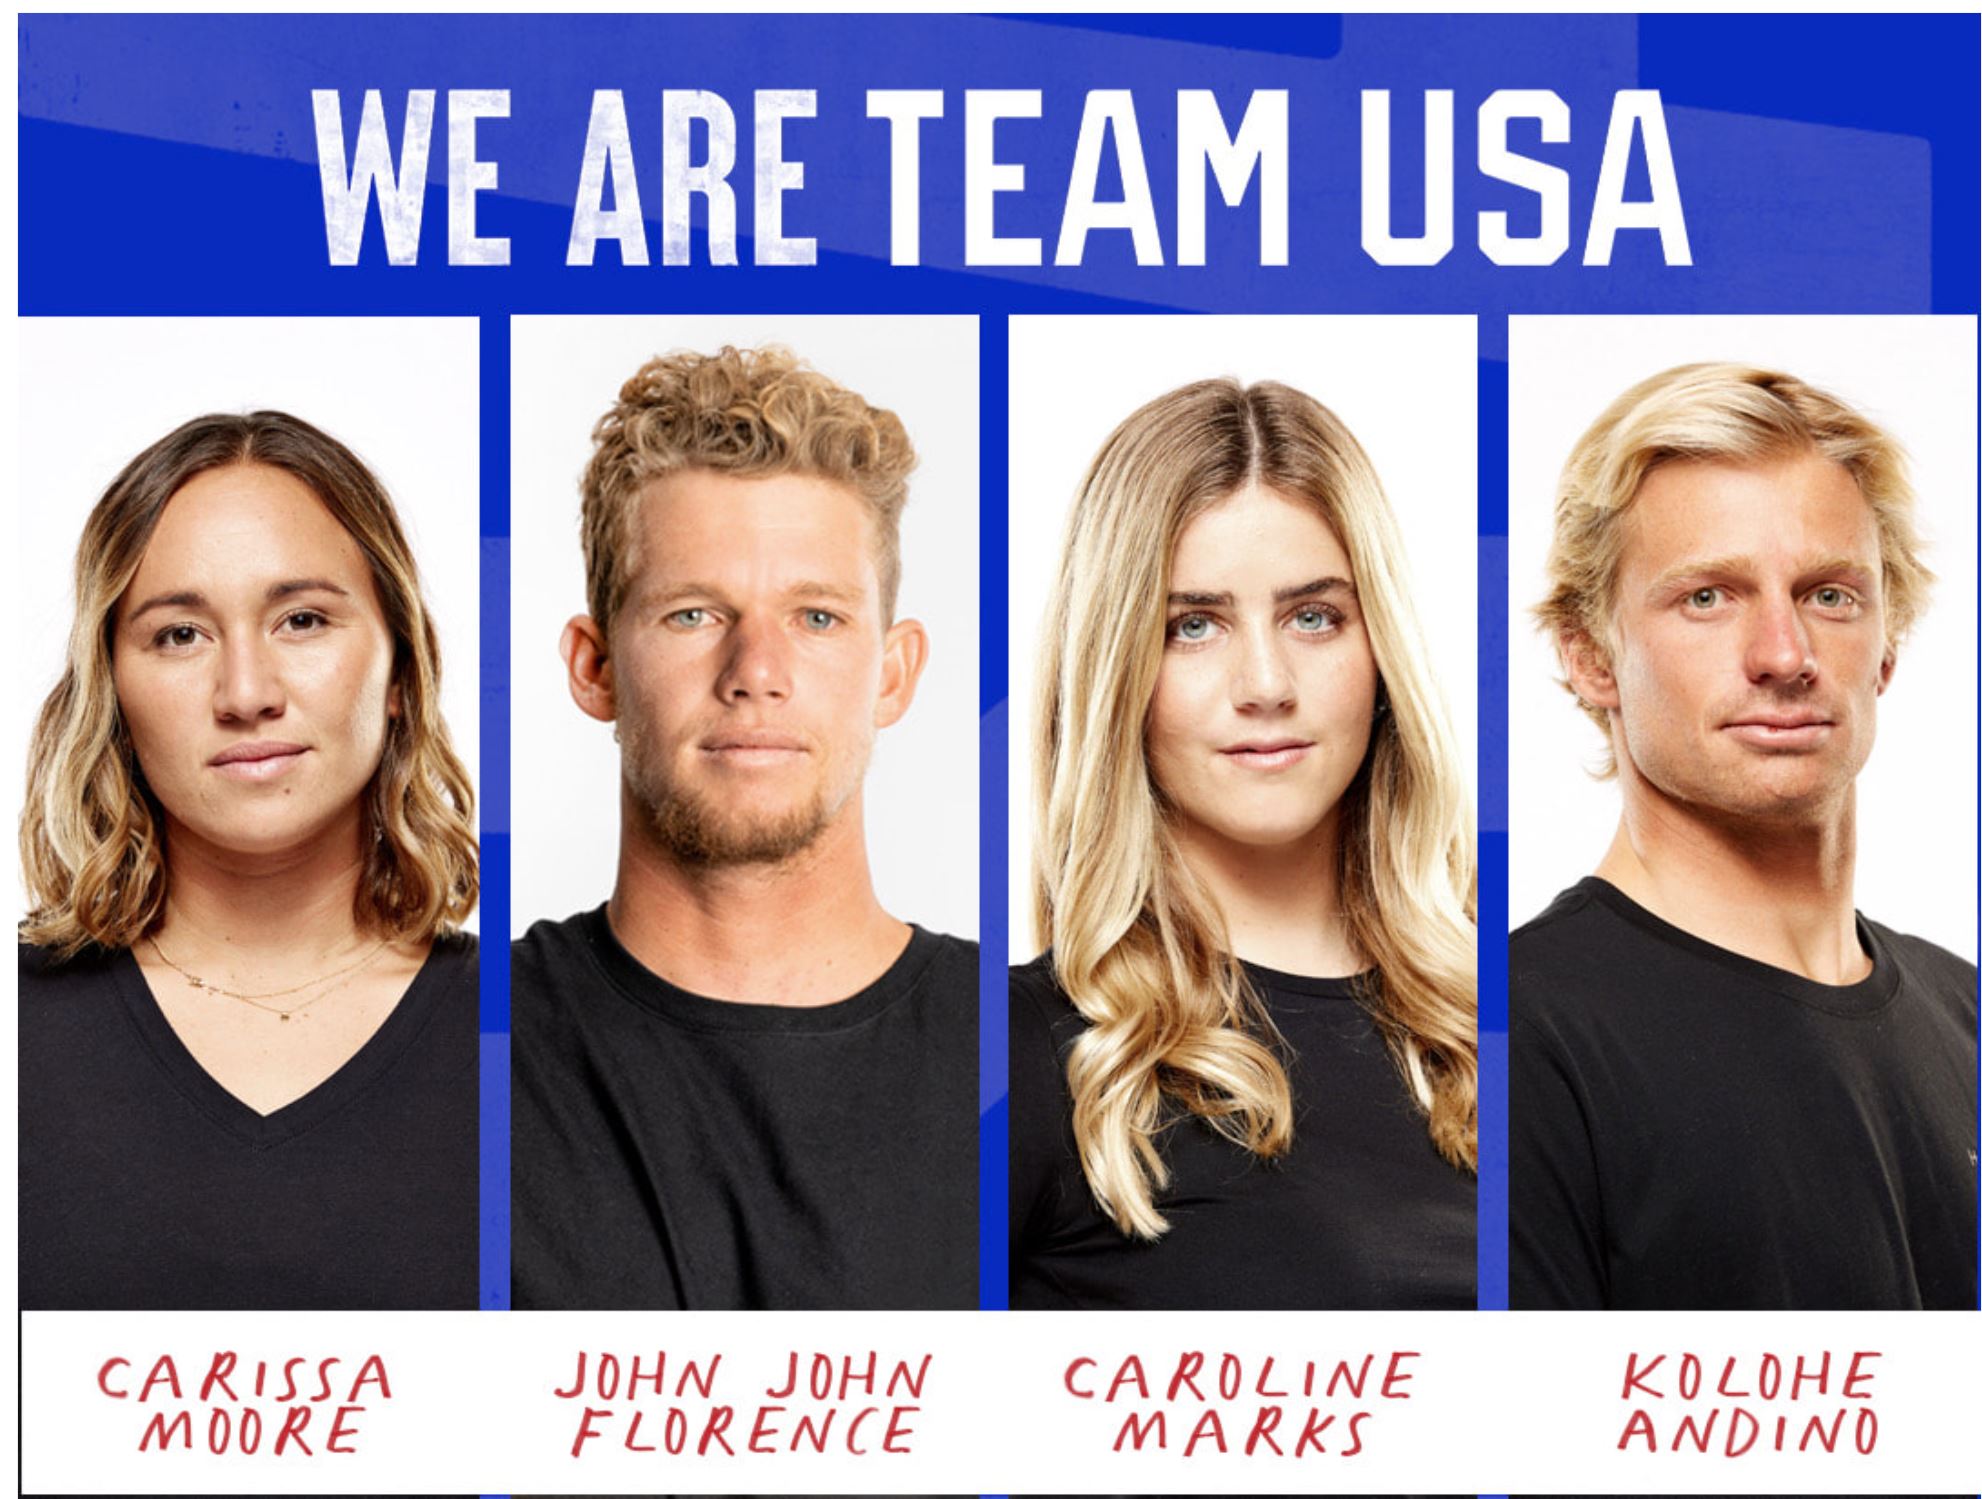 four side by side photos showing the four members of the 2020 Summer Olympic Surf Team